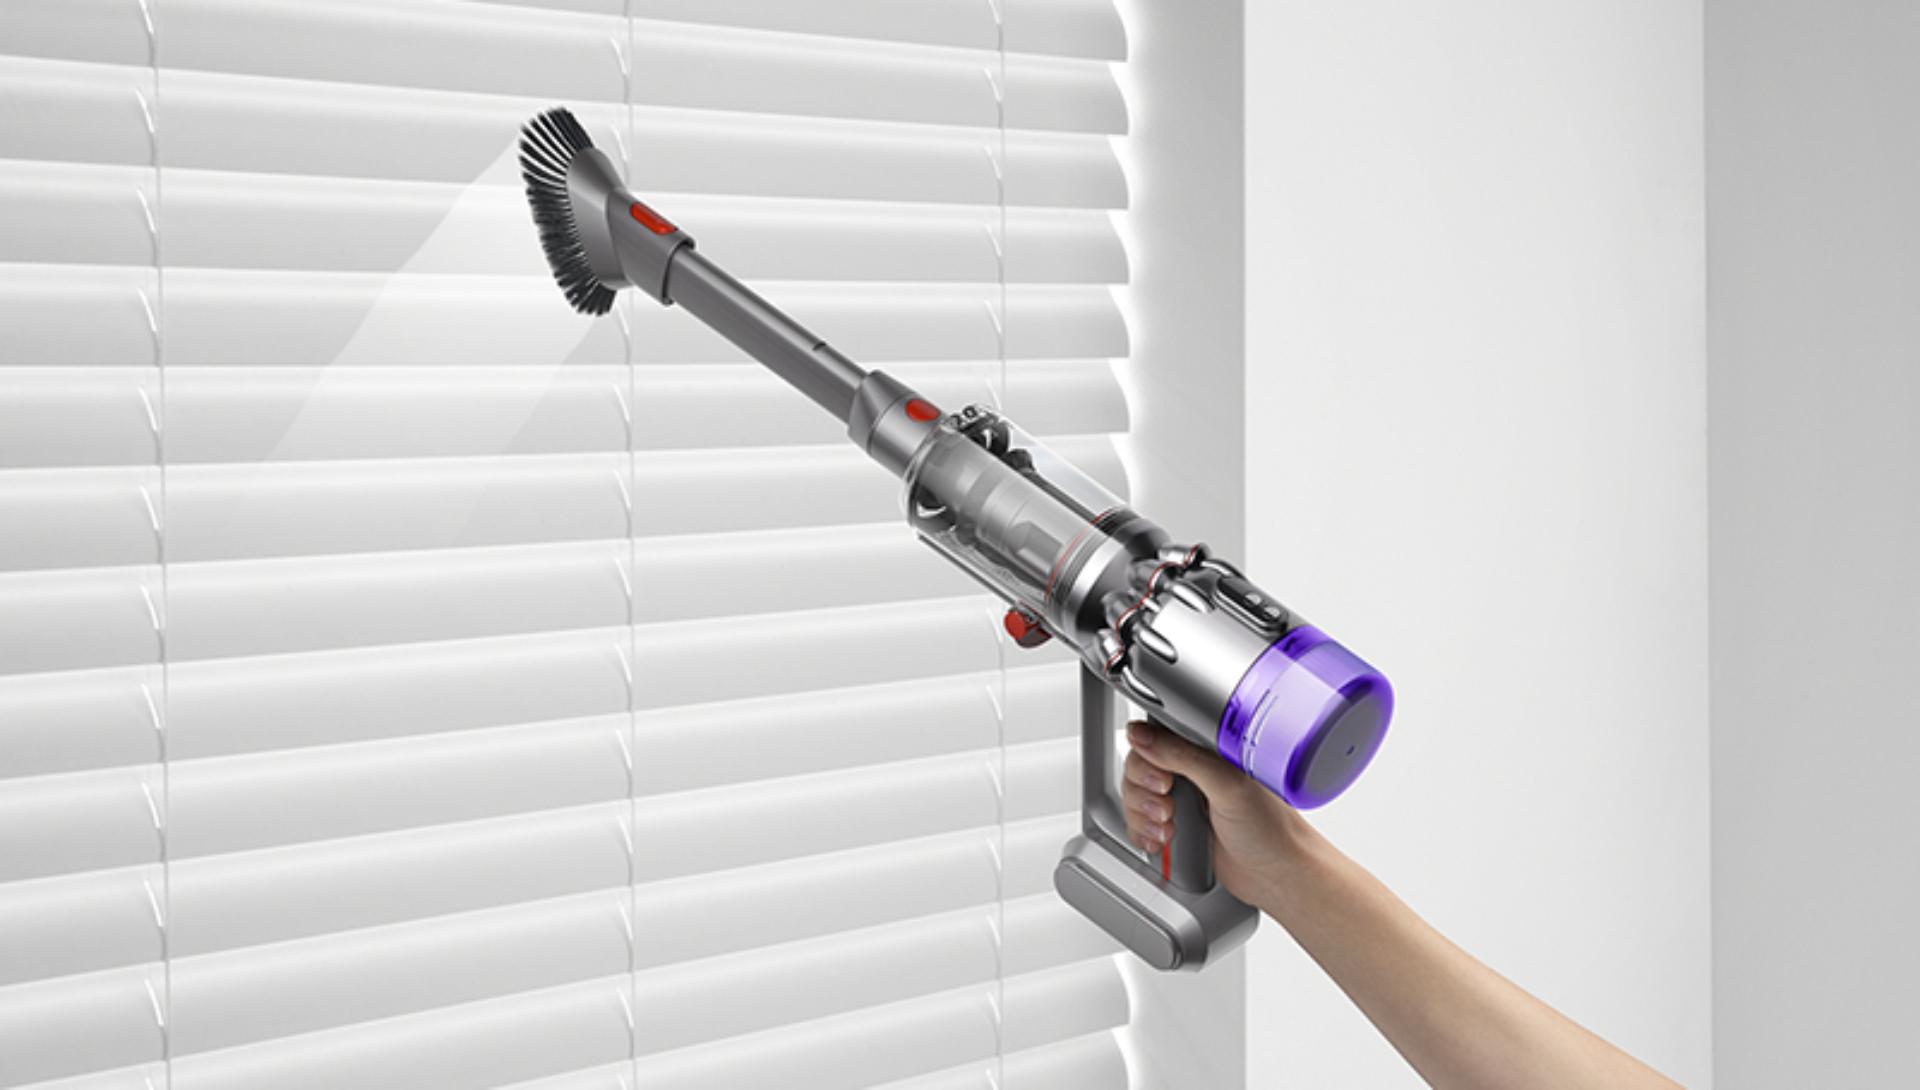 Dyson Humdinger vacuum cleaning window blinds